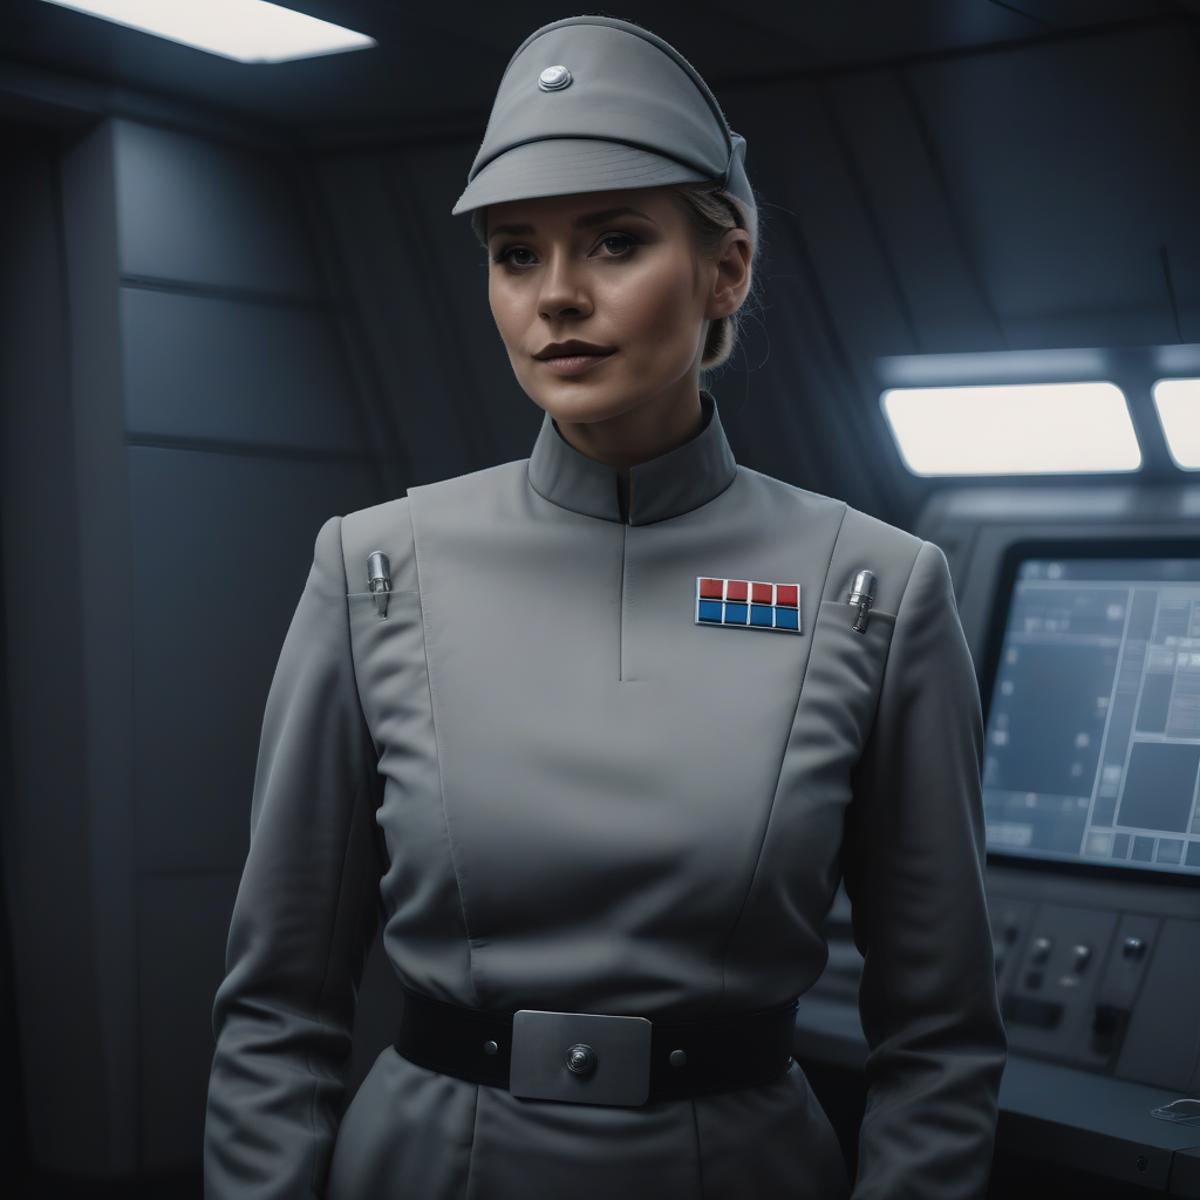 Imperial Officer (Star Wars) image by protongle